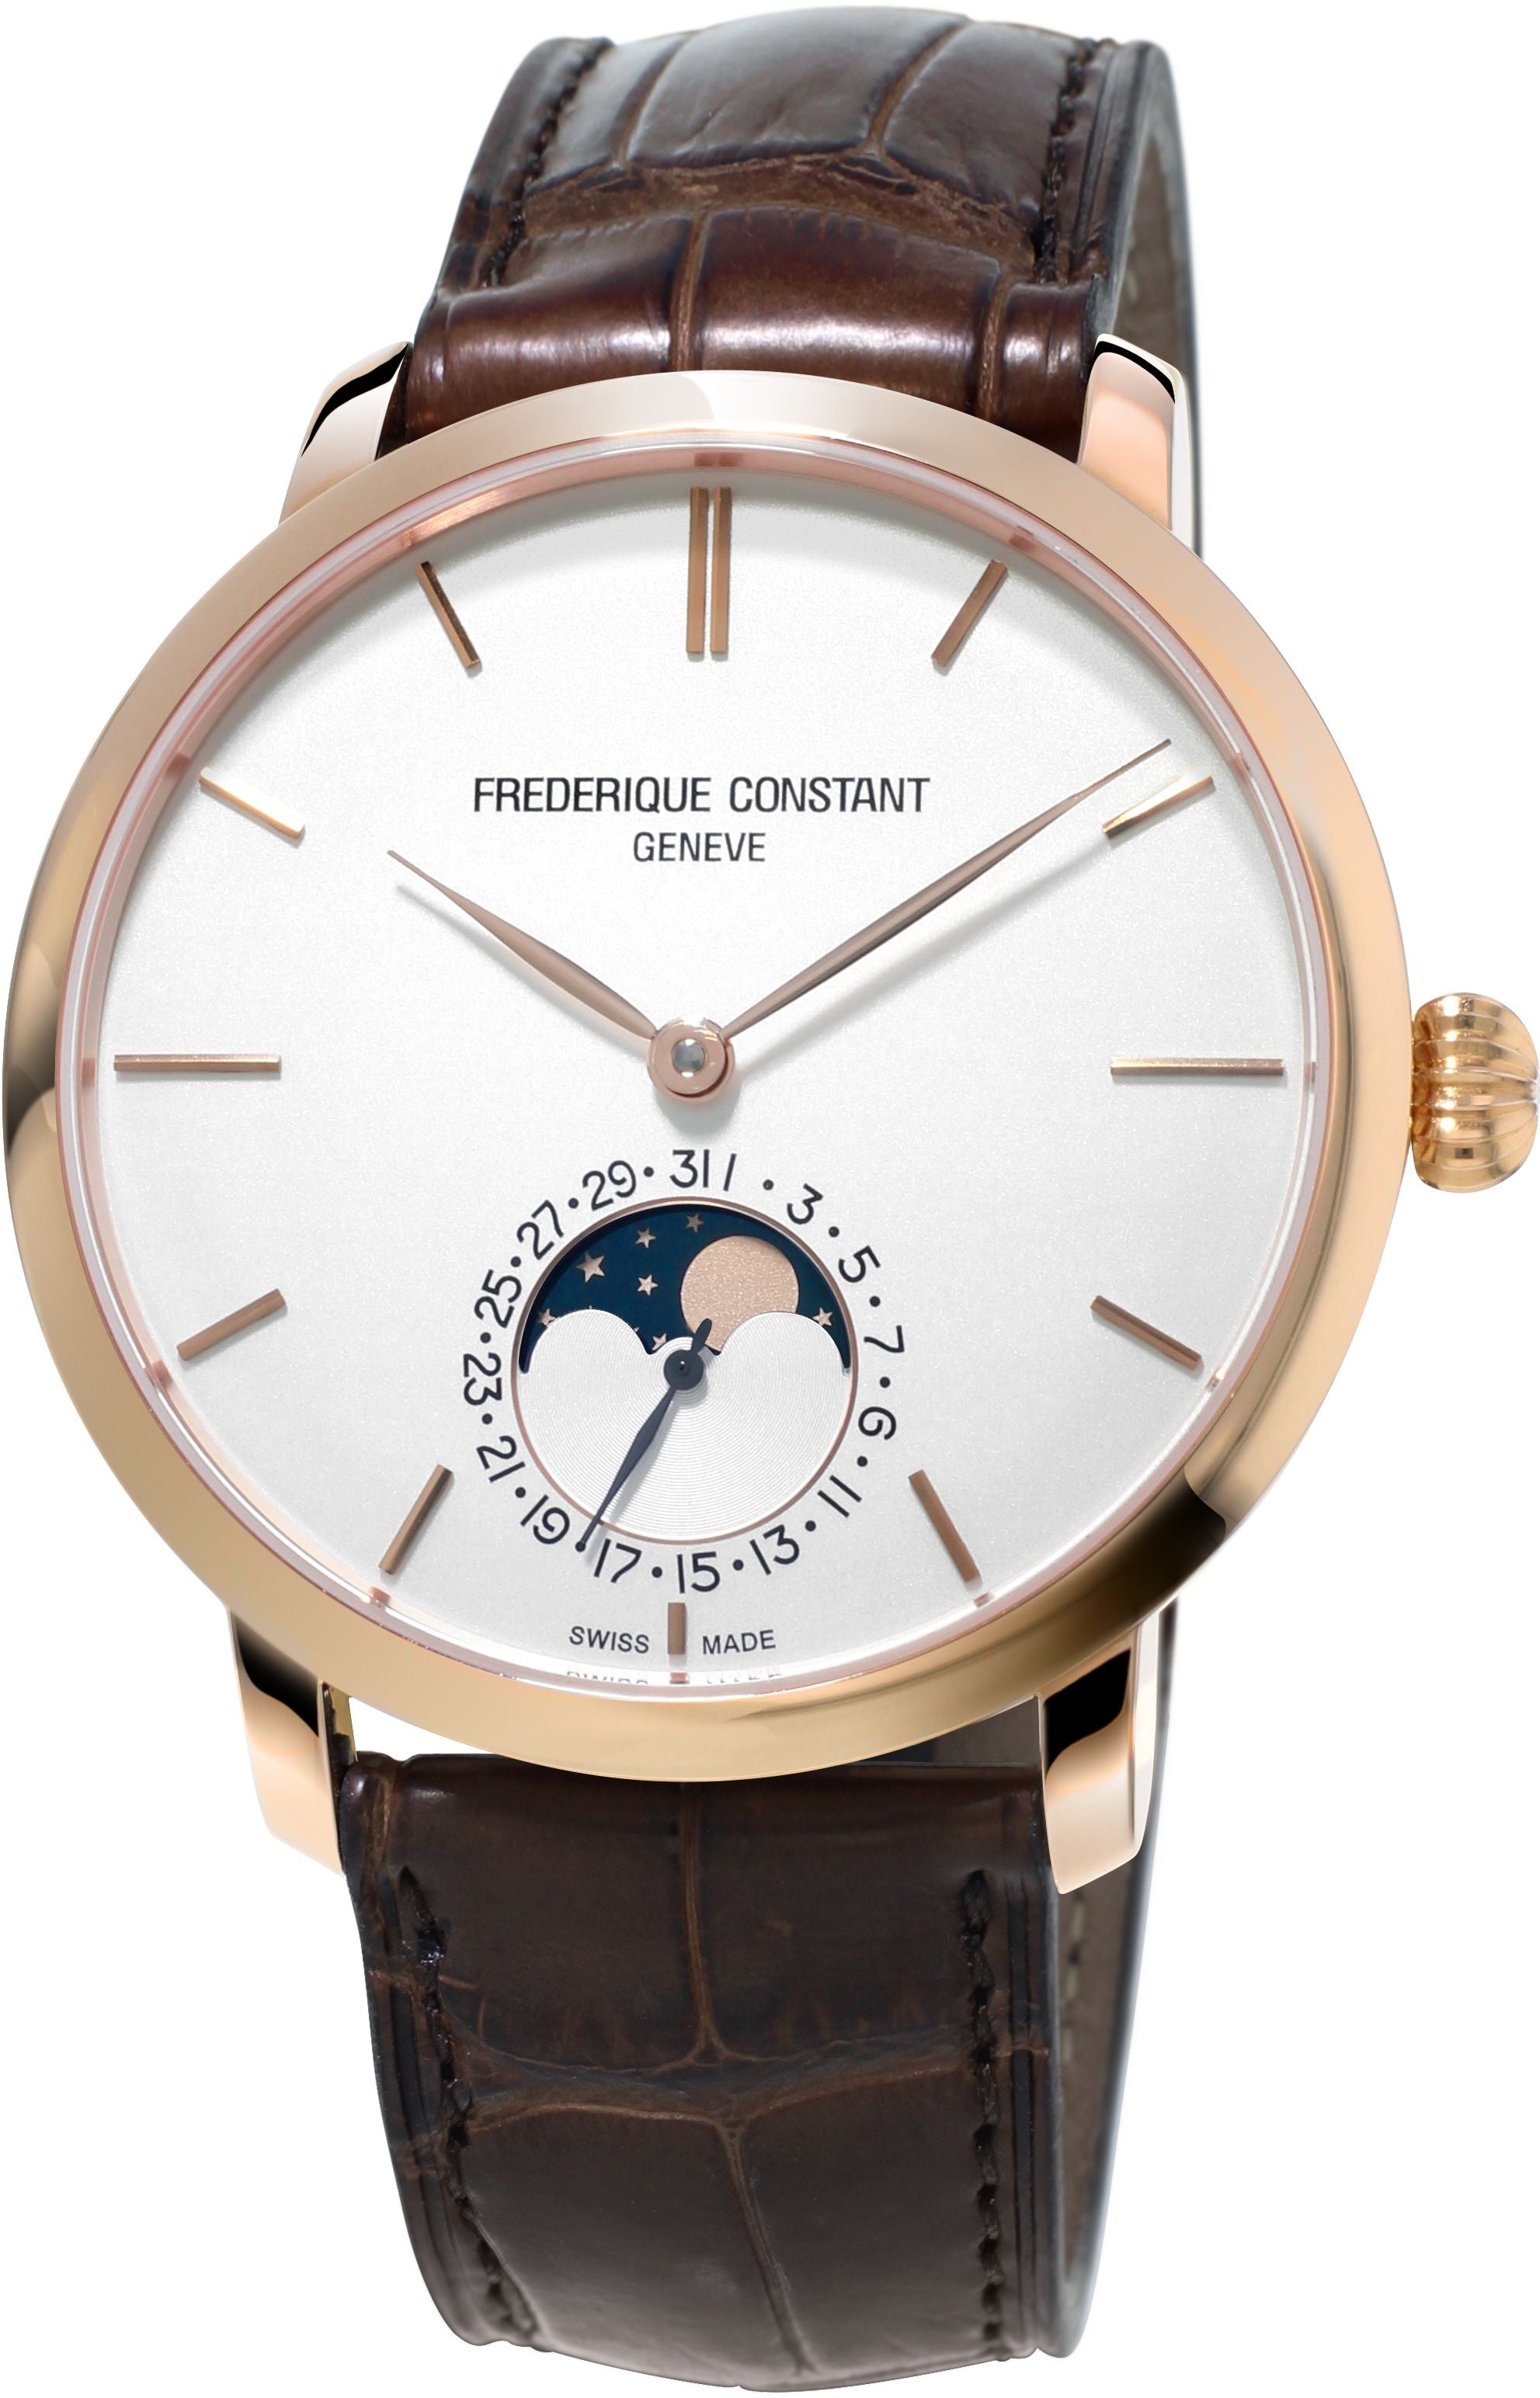 FREDERIQUE CONSTANT MENS STAINLESS STEEL Rose Gold-Tone Manufacture MANUFACTURE Genuine Alligator Strap